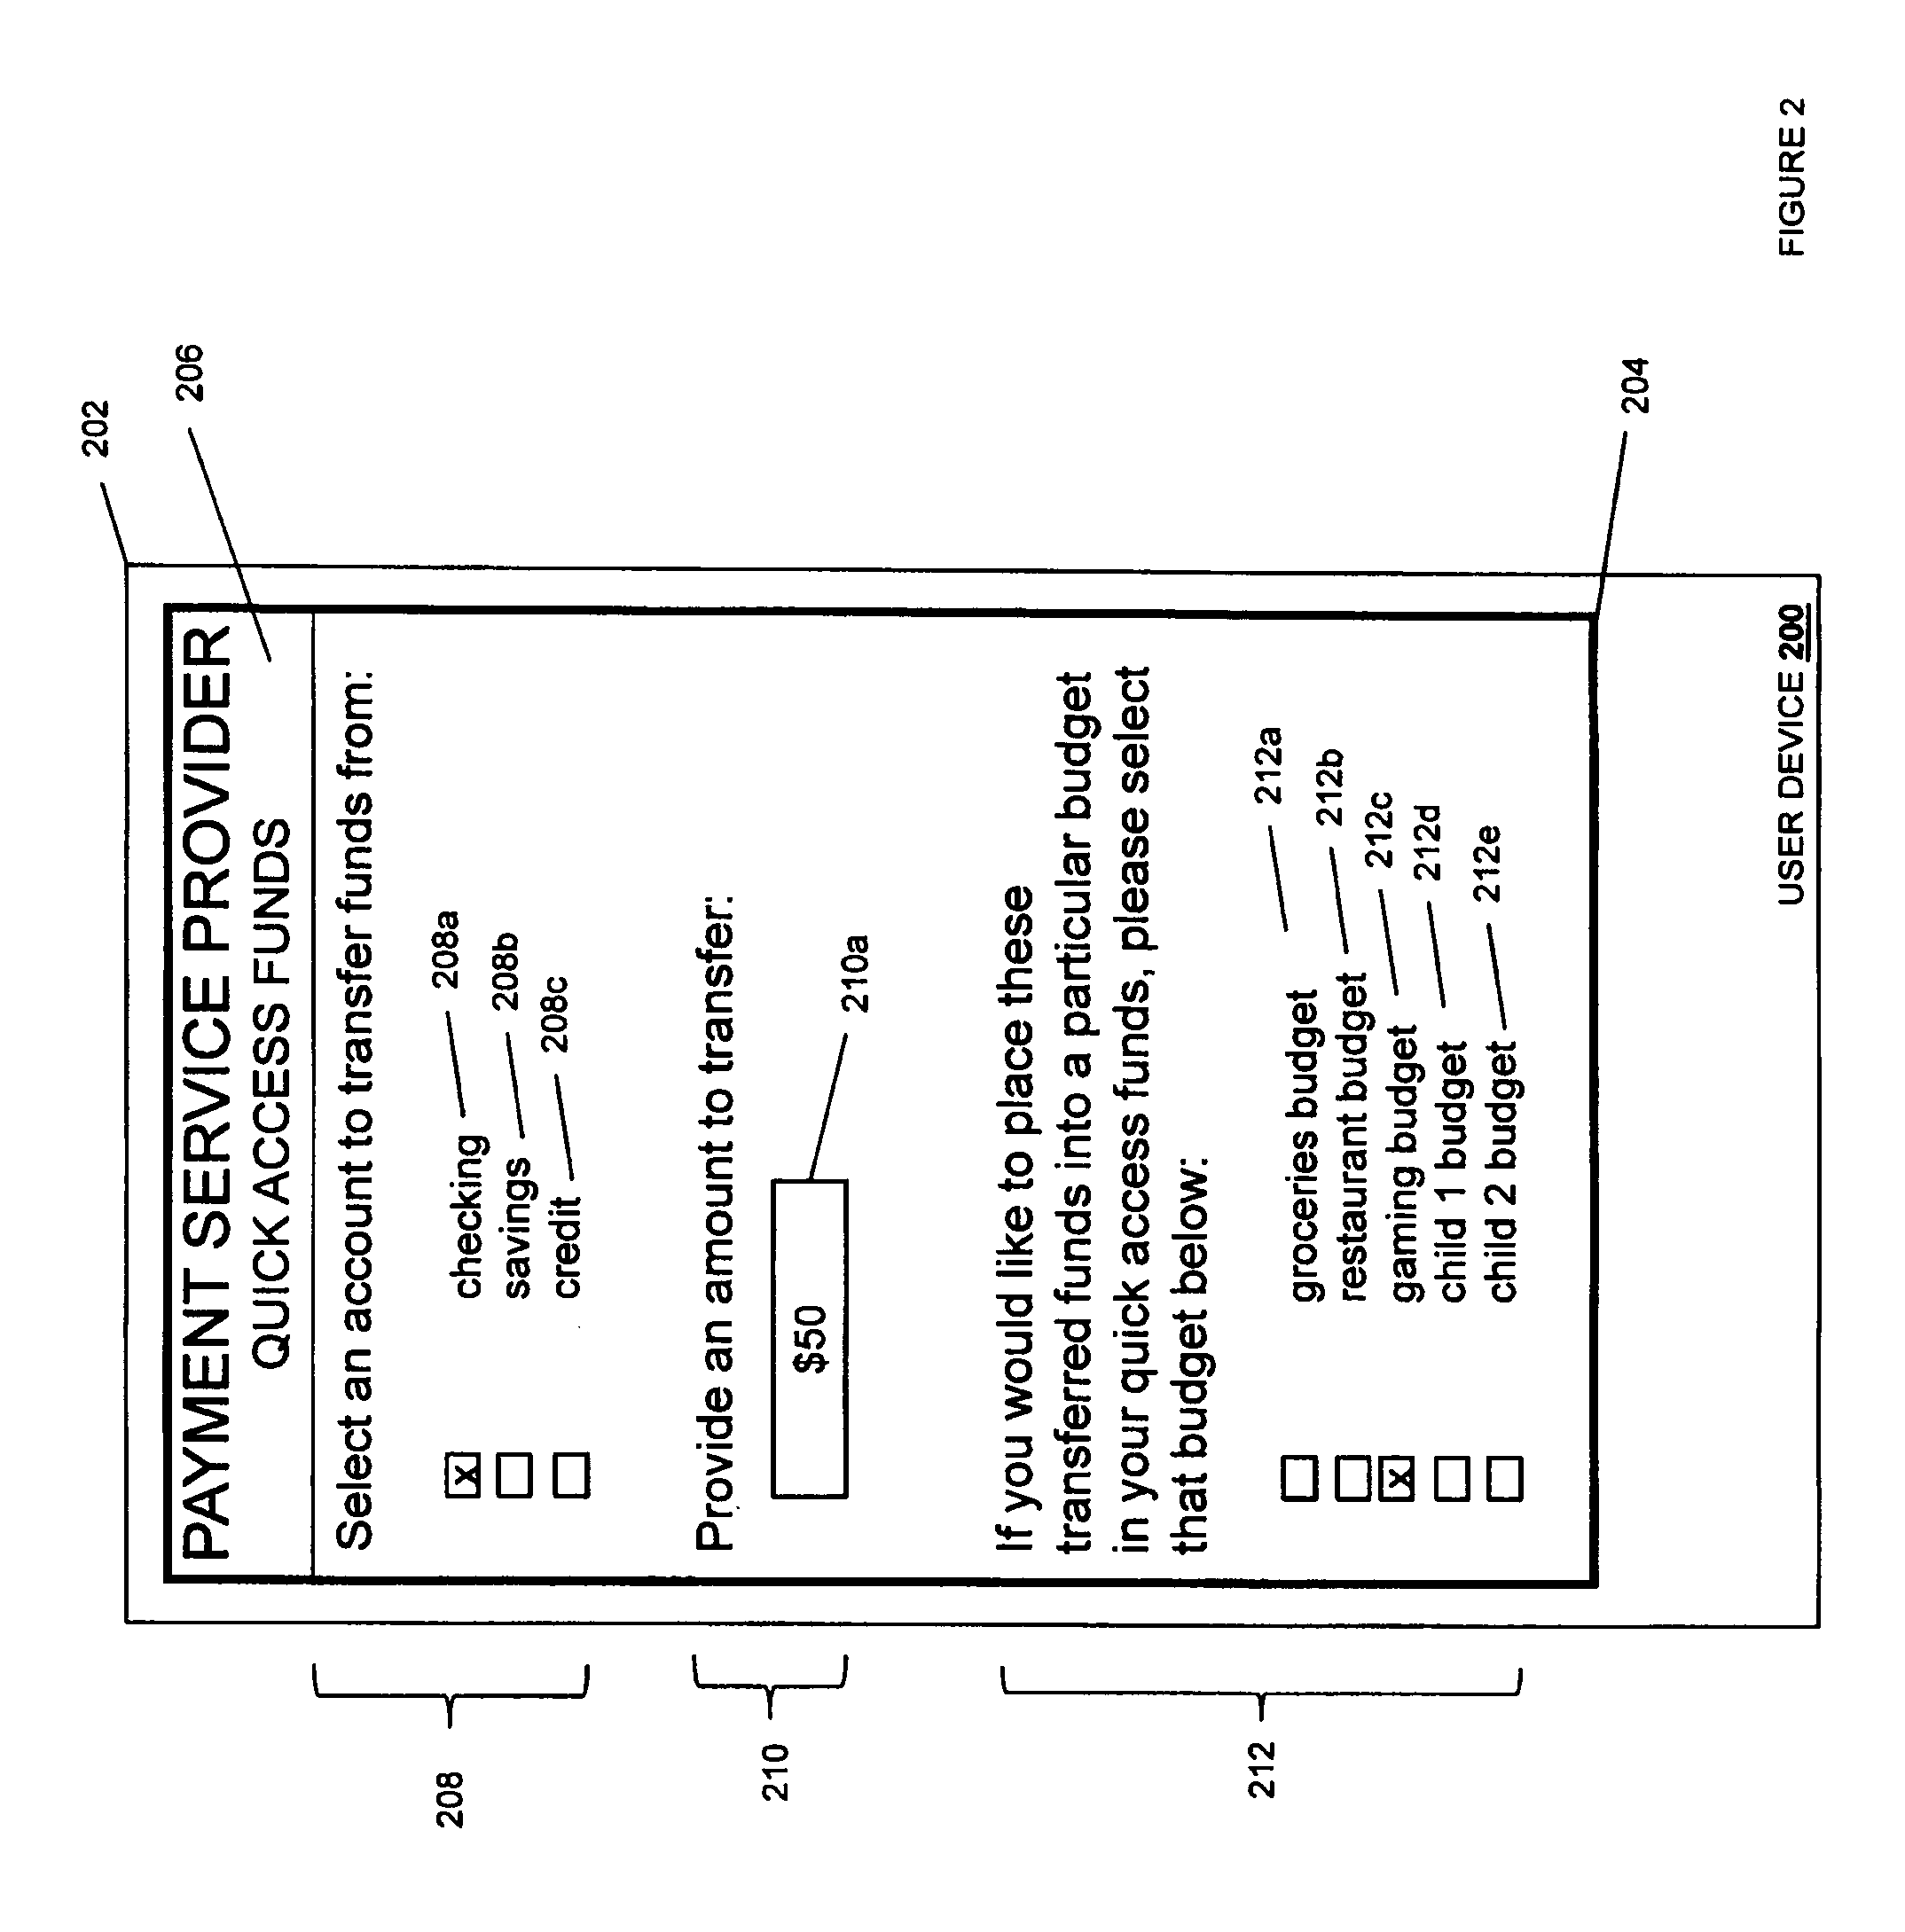 Multi-platform in-application payment system